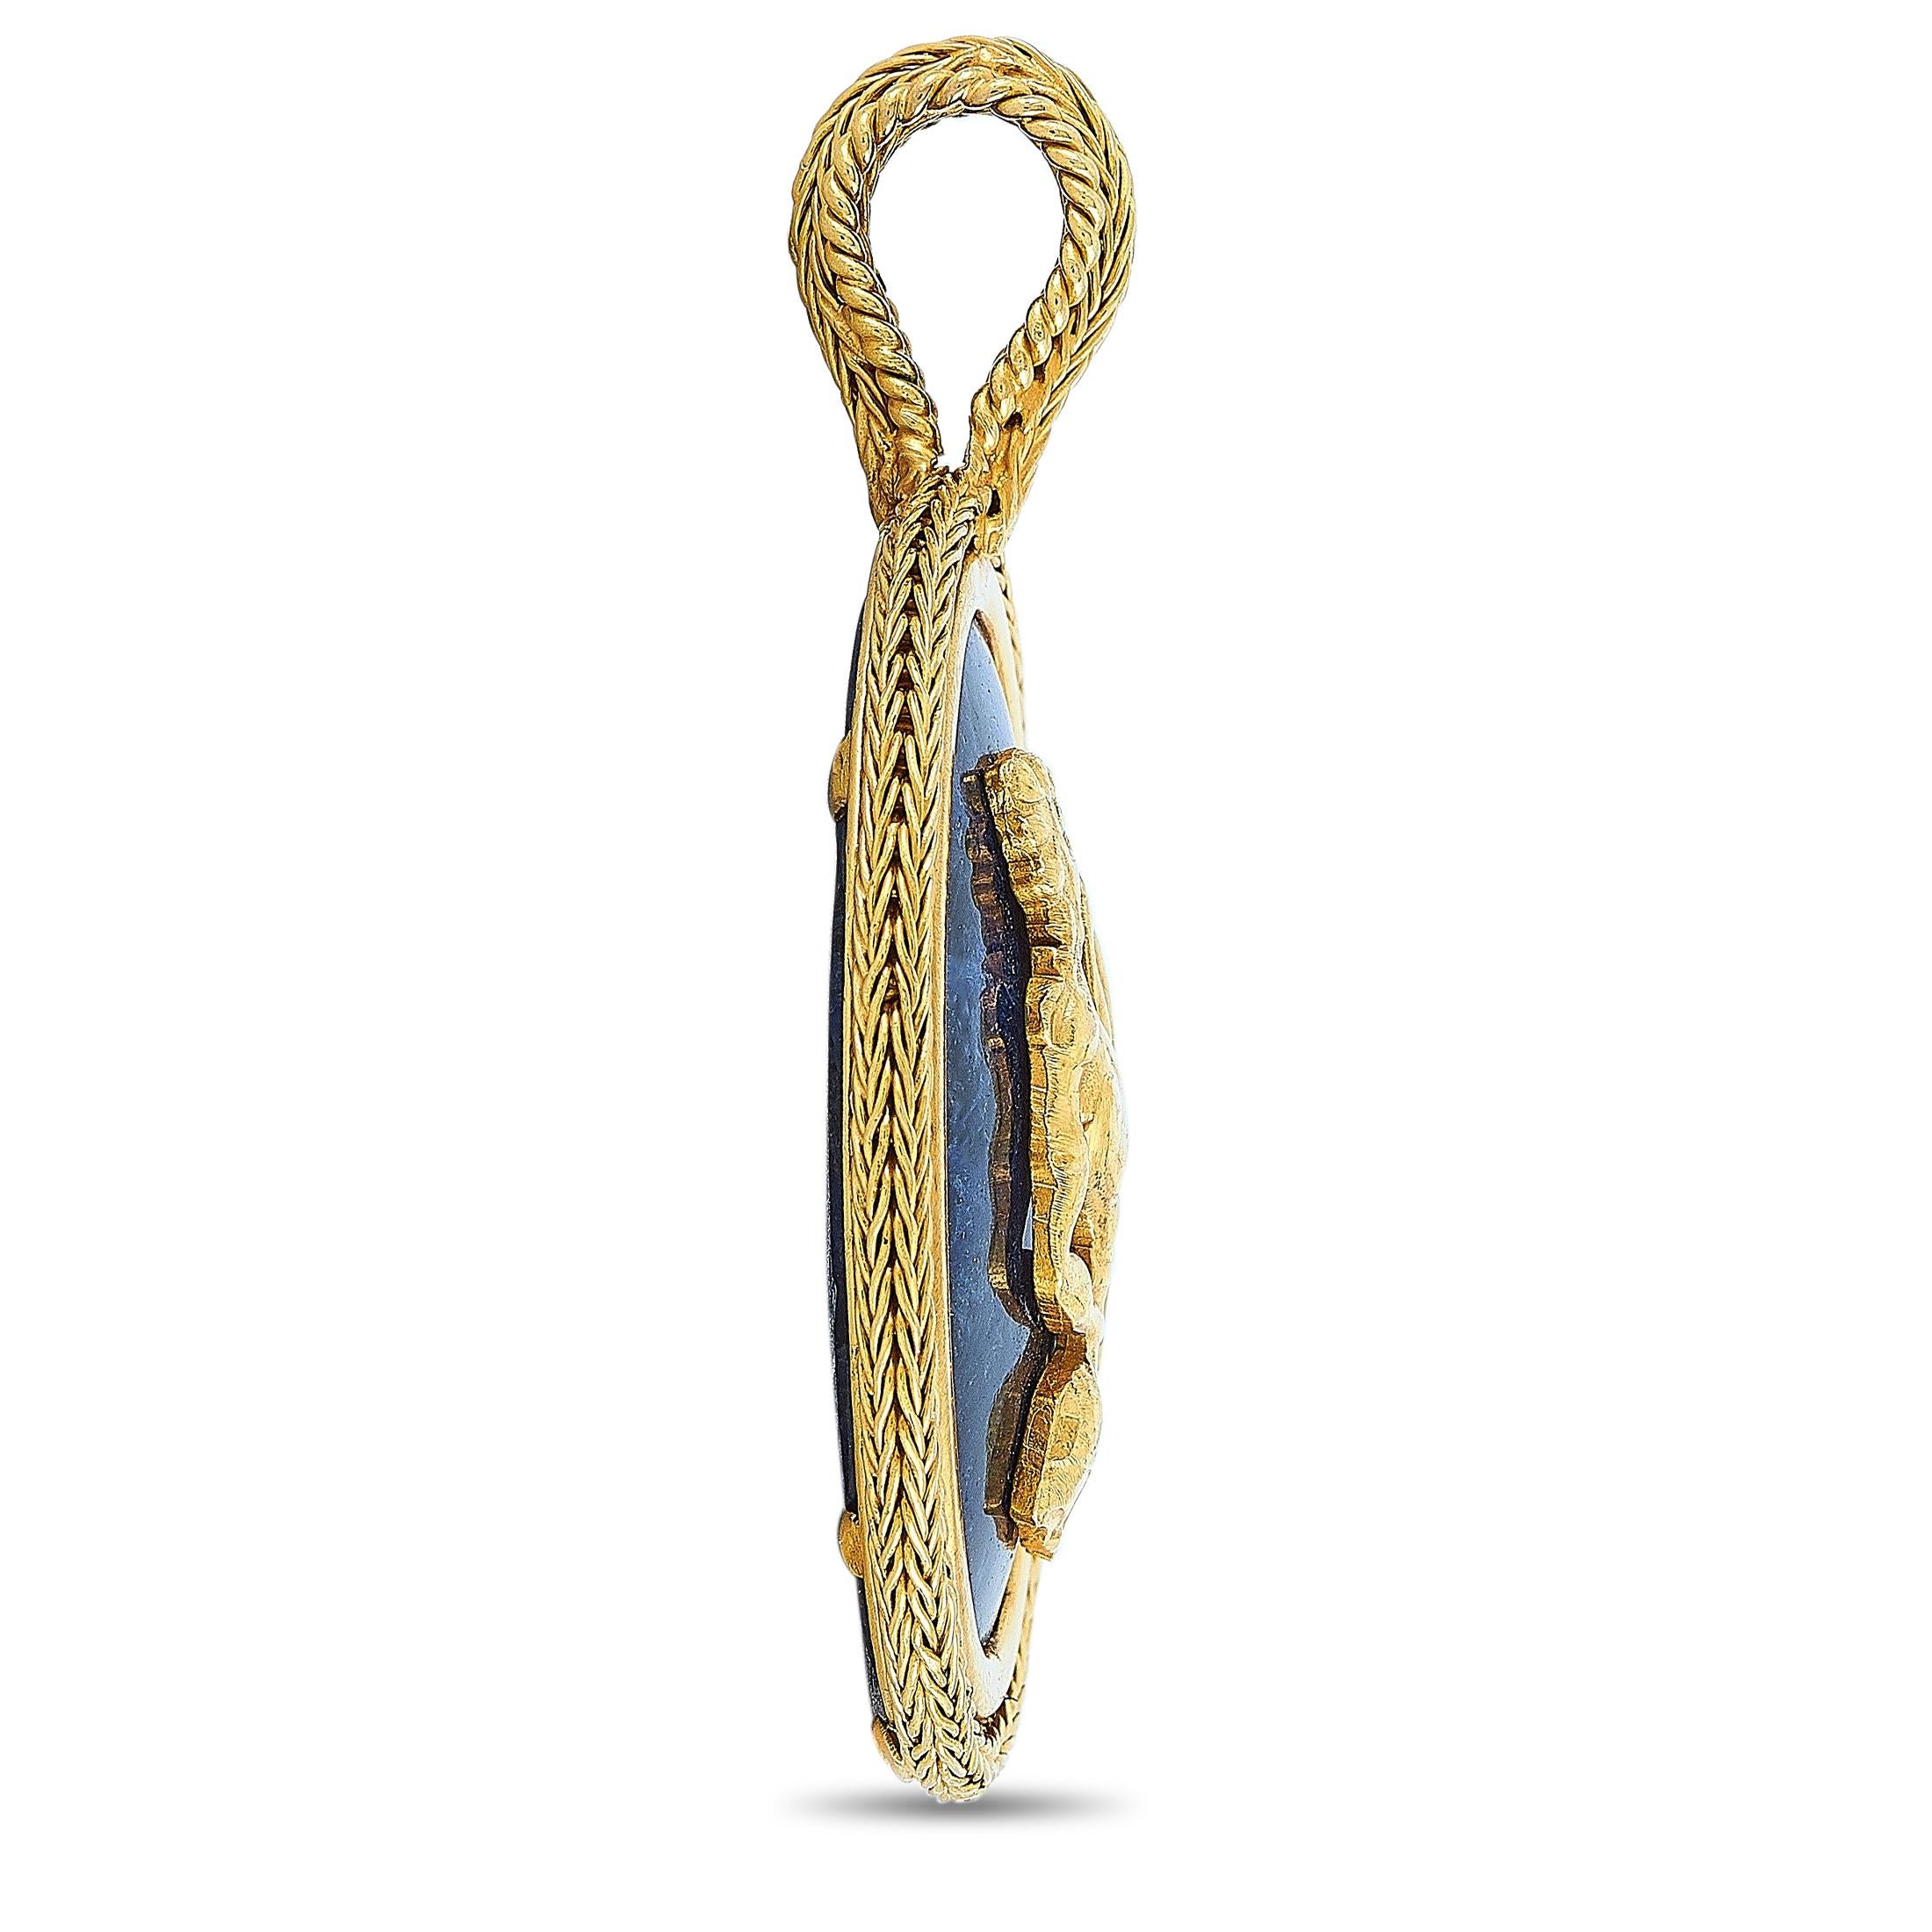 This Ilias Lalaounis pendant is made out of 18K yellow gold and sodalite and weighs 22.8 grams. It measures 2.12” in length and 1.30” in width.

The pendant is offered in estate condition and includes a gift box.